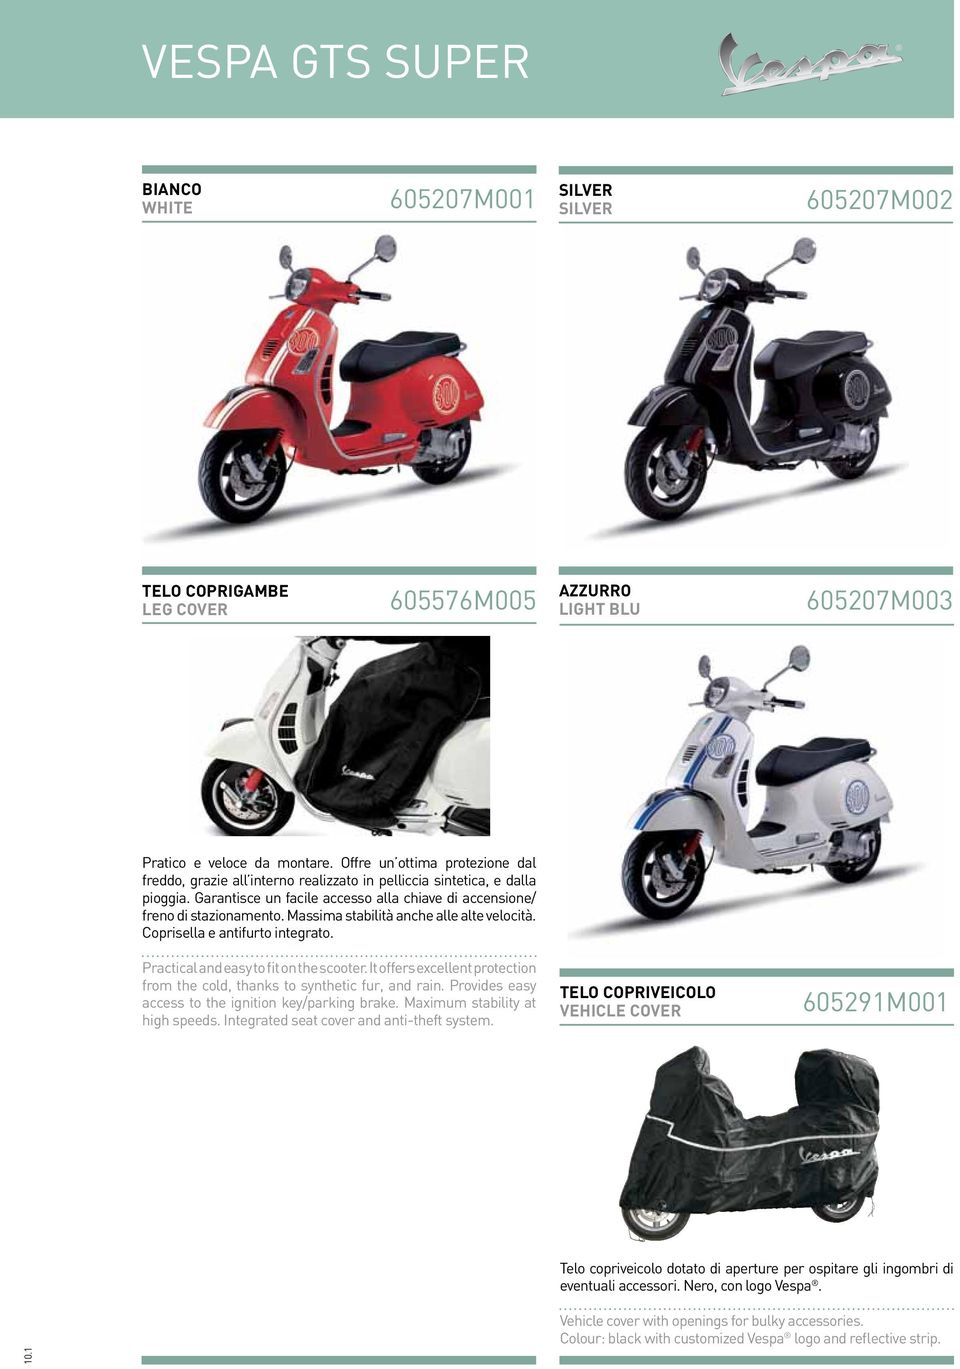 Massima stabilità anche alle alte velocità. Coprisella e antifurto integrato. Practical and easy to fit on the scooter. It offers excellent protection from the cold, thanks to synthetic fur, and rain.